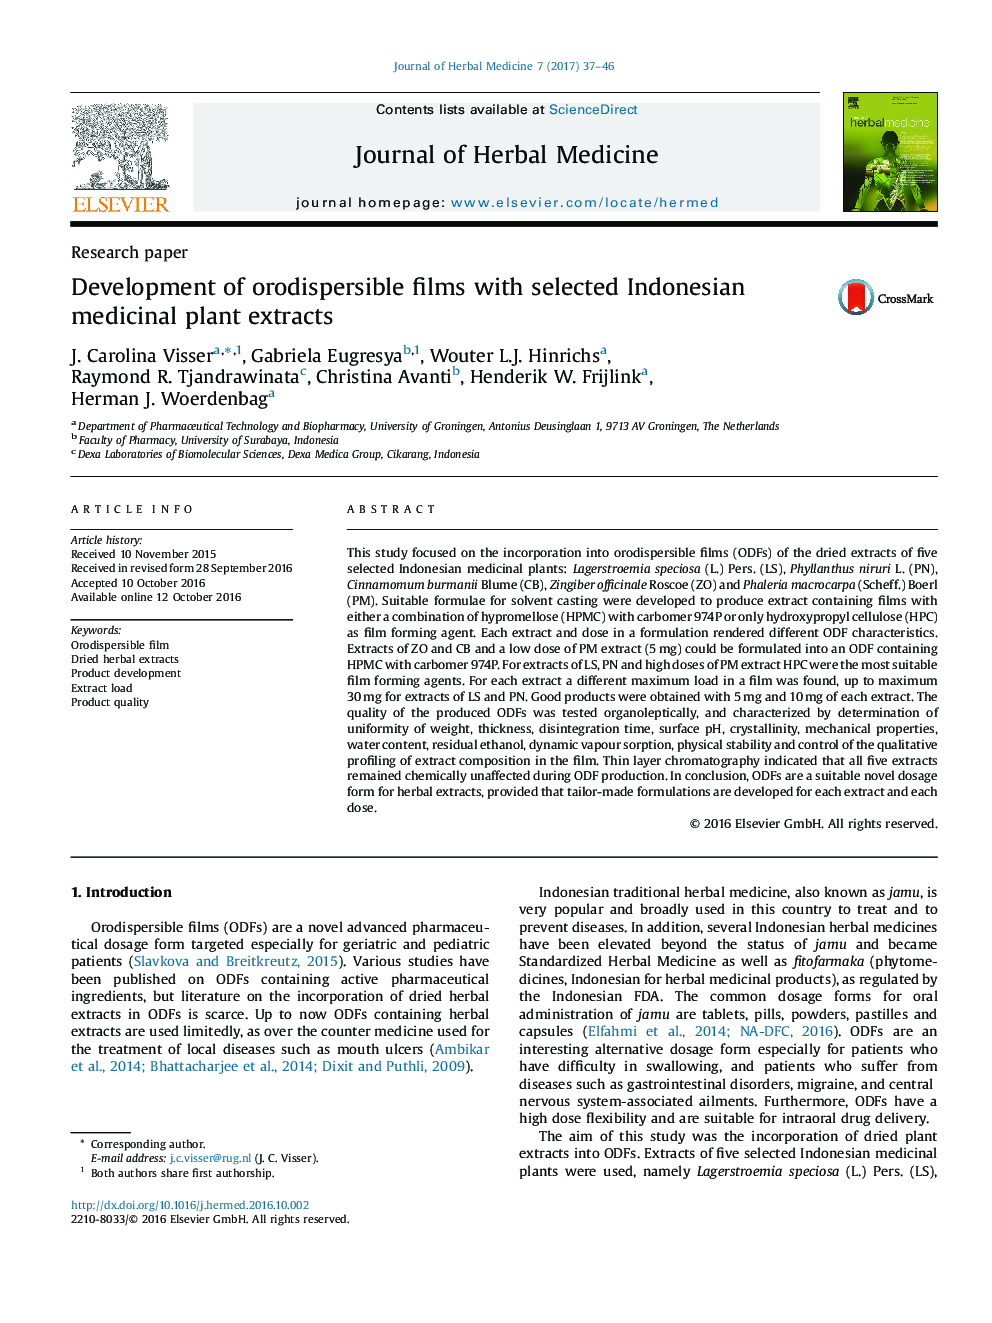 Development of orodispersible films with selected Indonesian medicinal plant extracts